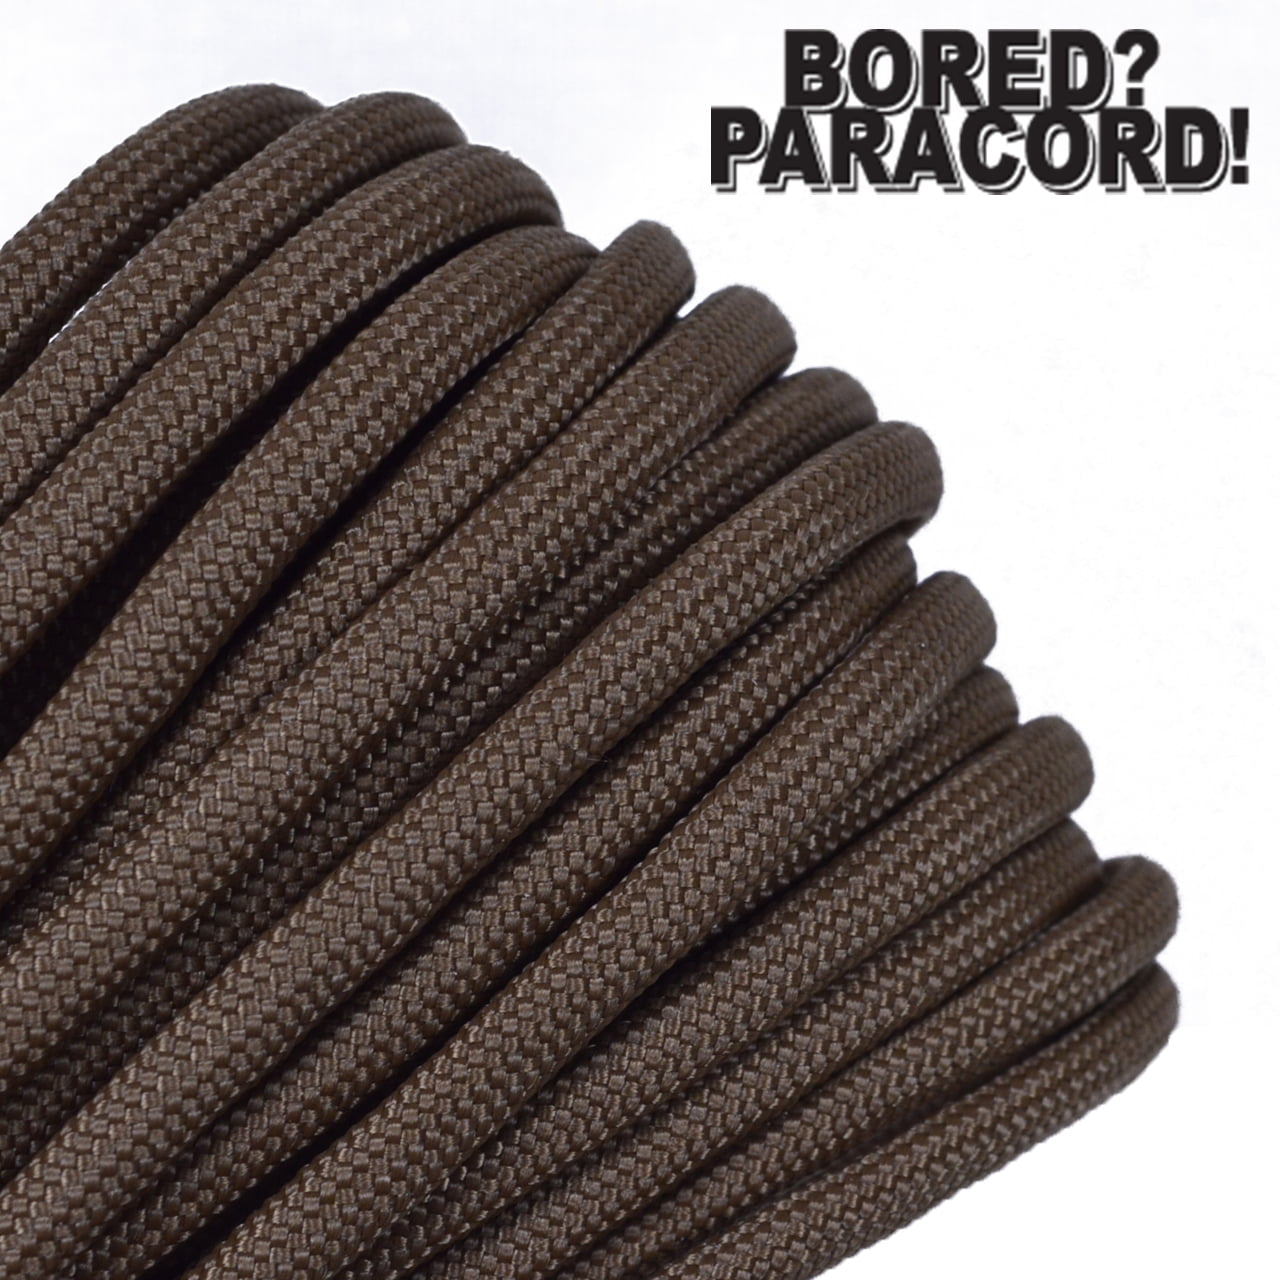 Bored Paracord Brand 550 lb Type III Paracord - Coyote Brown 50 Feet